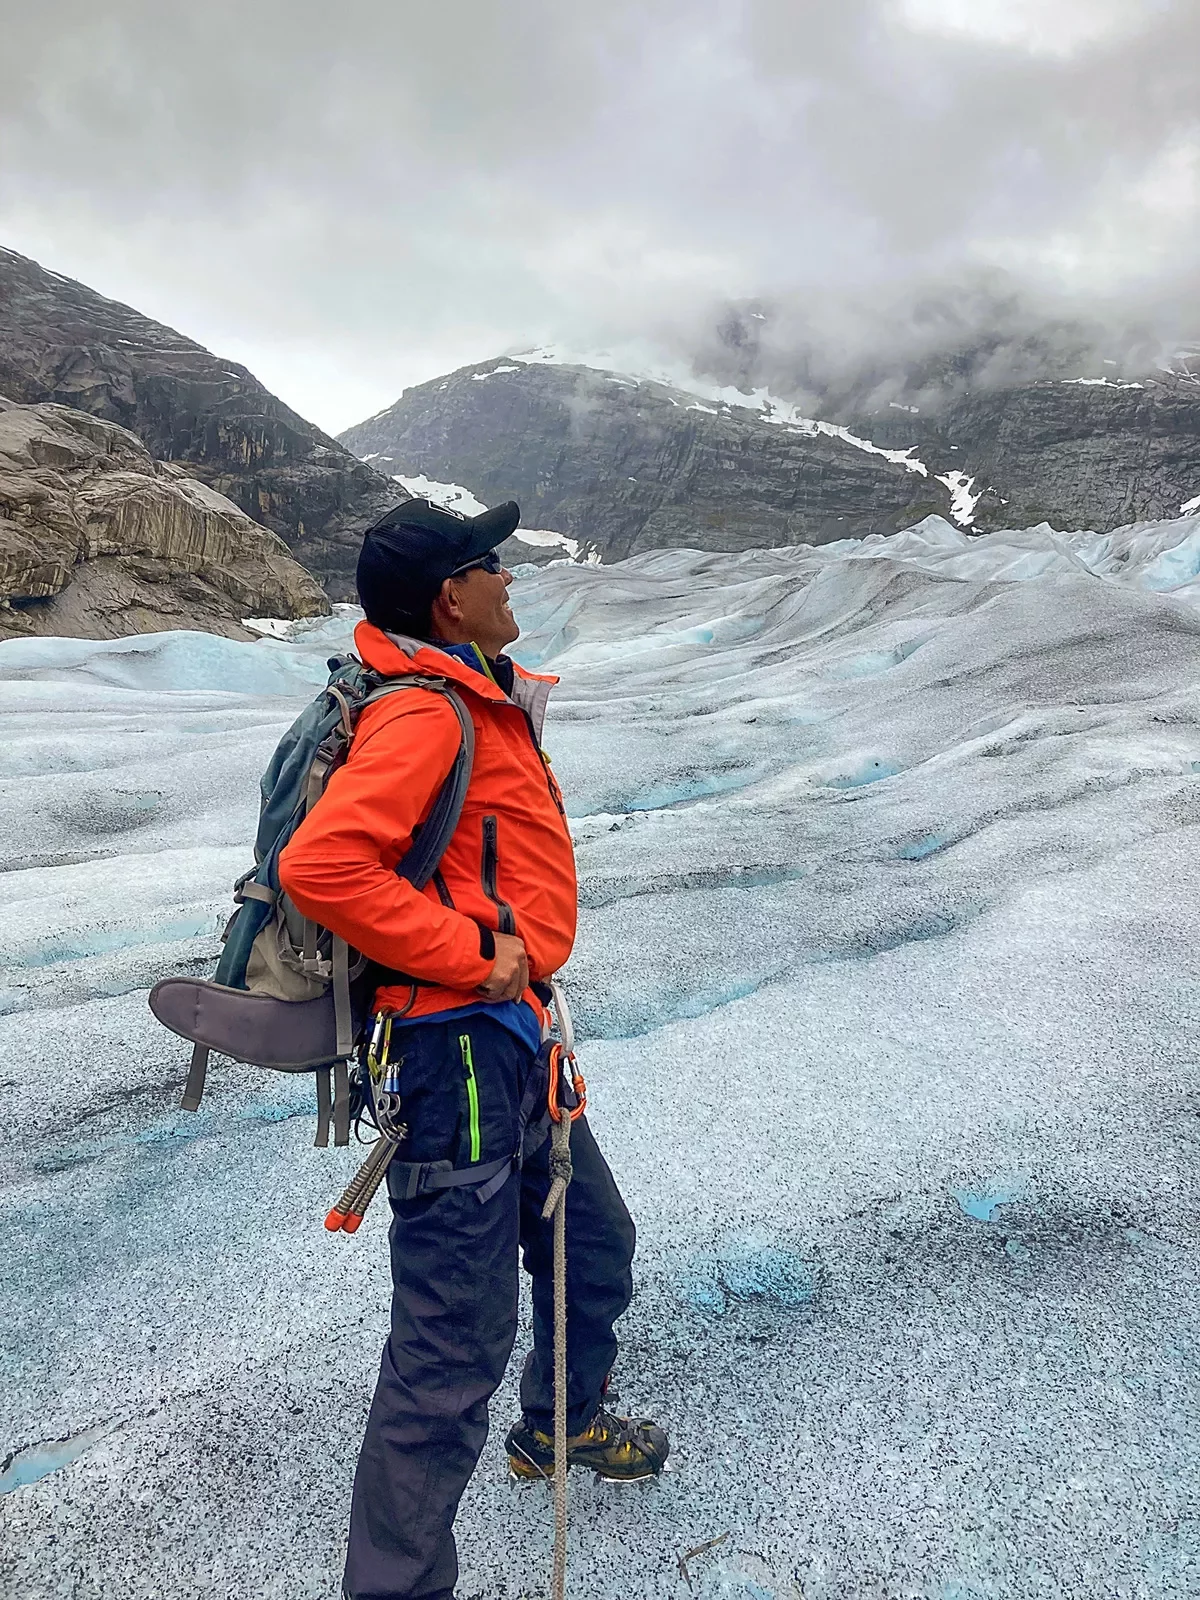 Solo hiker gazing out on a glacier